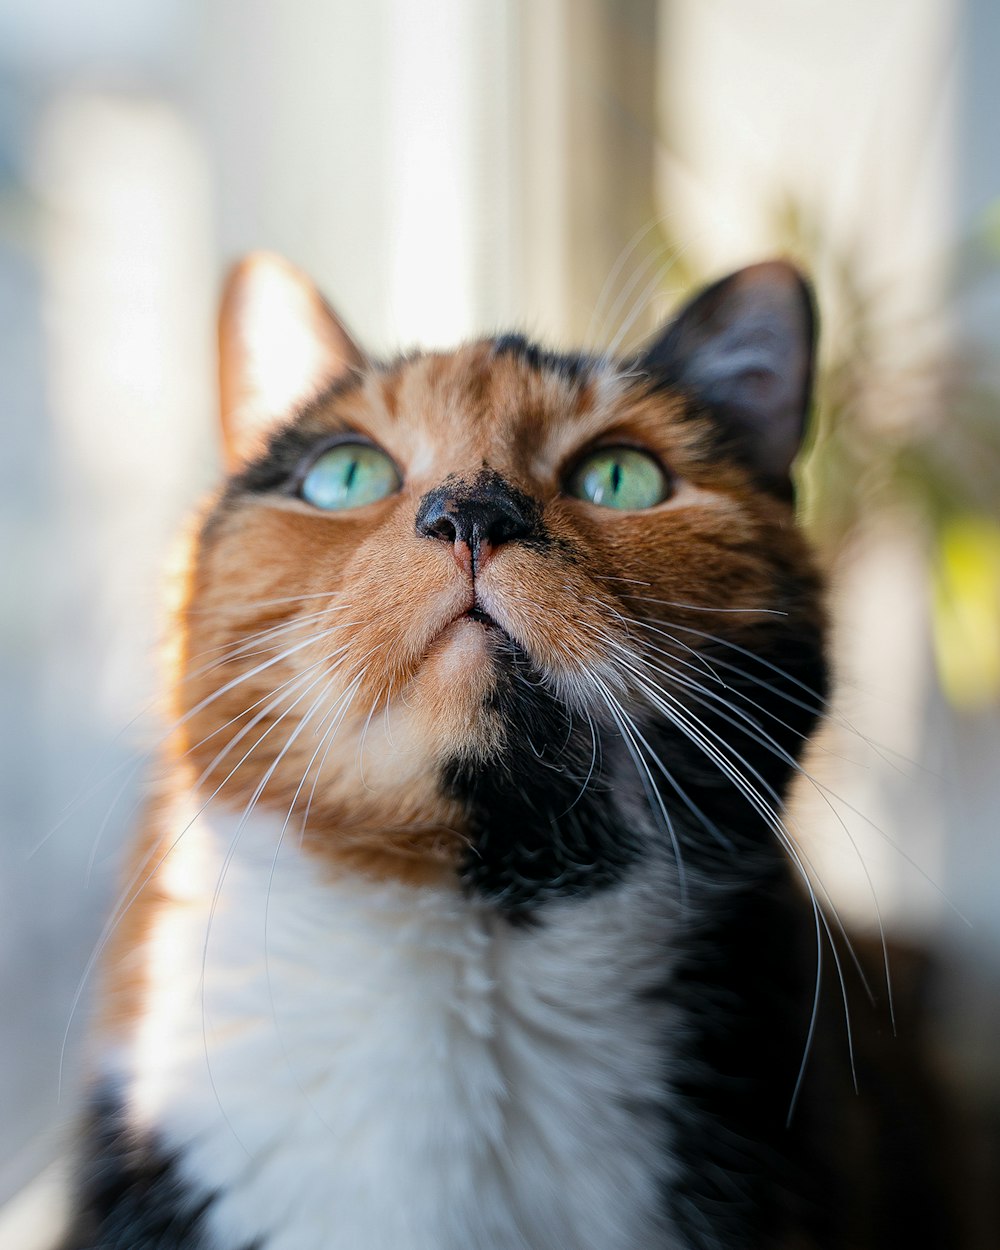 a close up of a cat looking up